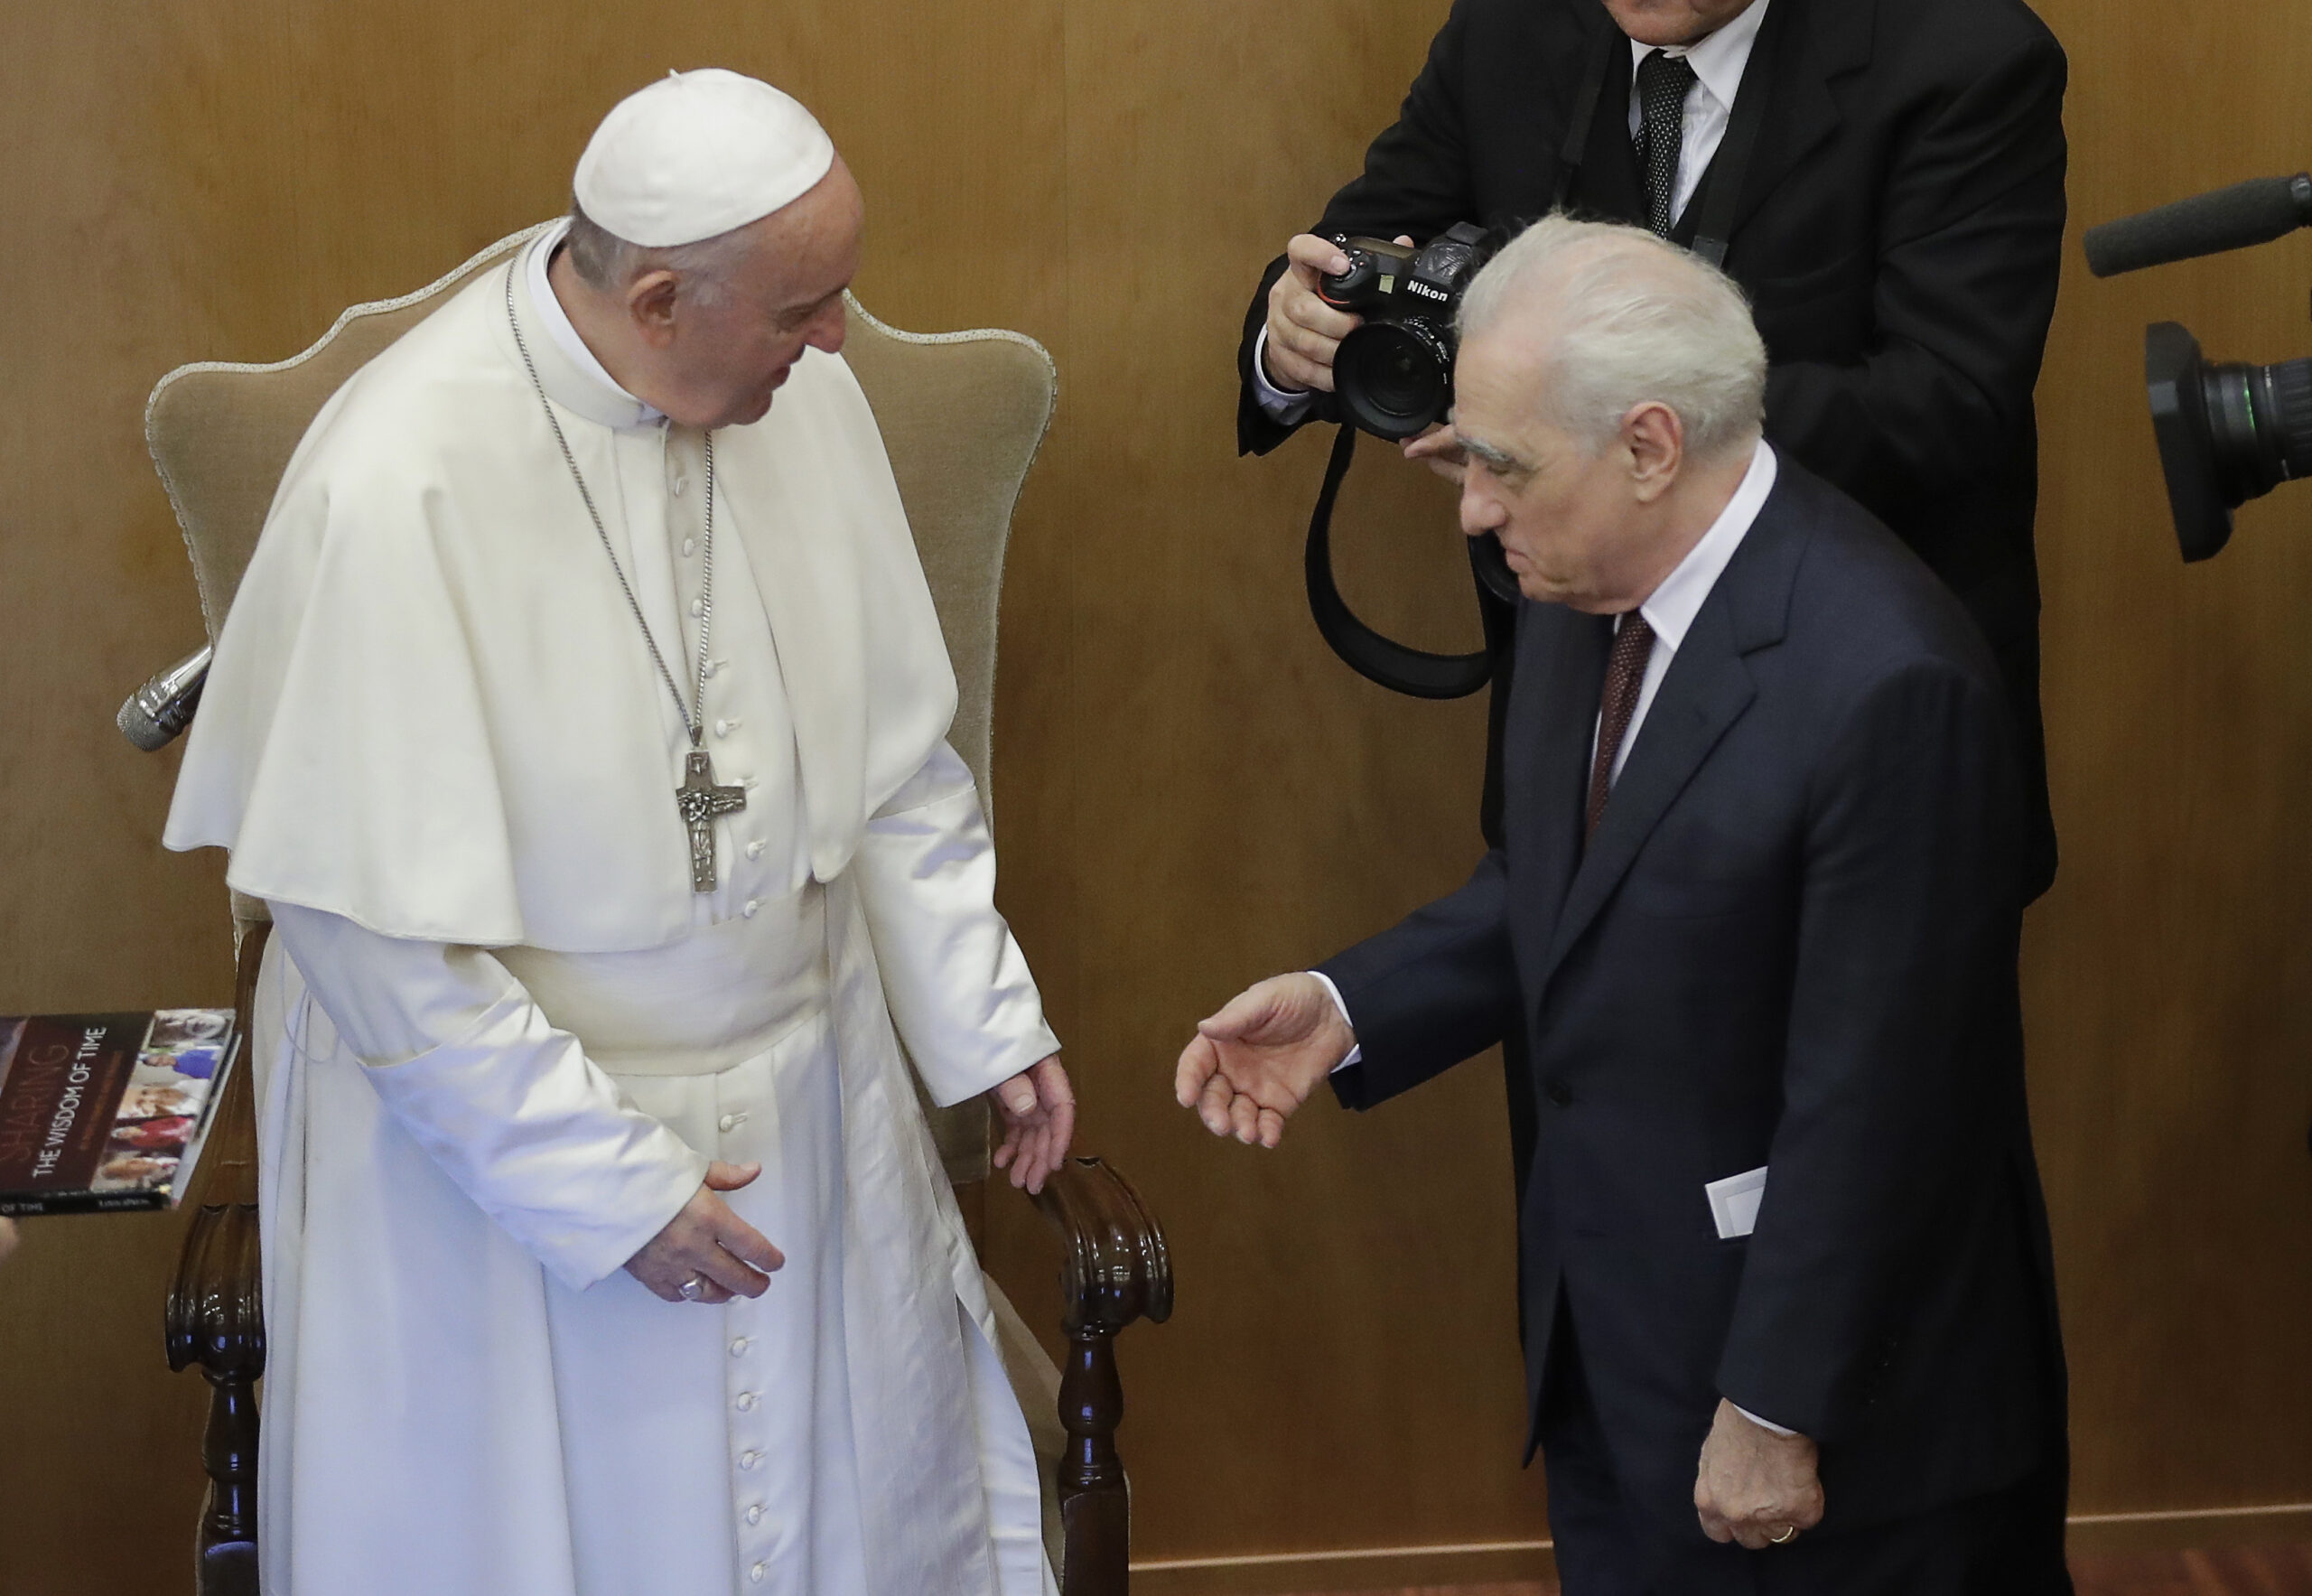 Film director Martin Scorsese greets Pope Francis at the end of the book presentation "The Wisdom of Time", a collection of 250 interviews from over 30 countries, with various stories of old and young people commented by Pope Francis. (AP Photo/Alessandra Tarantino)